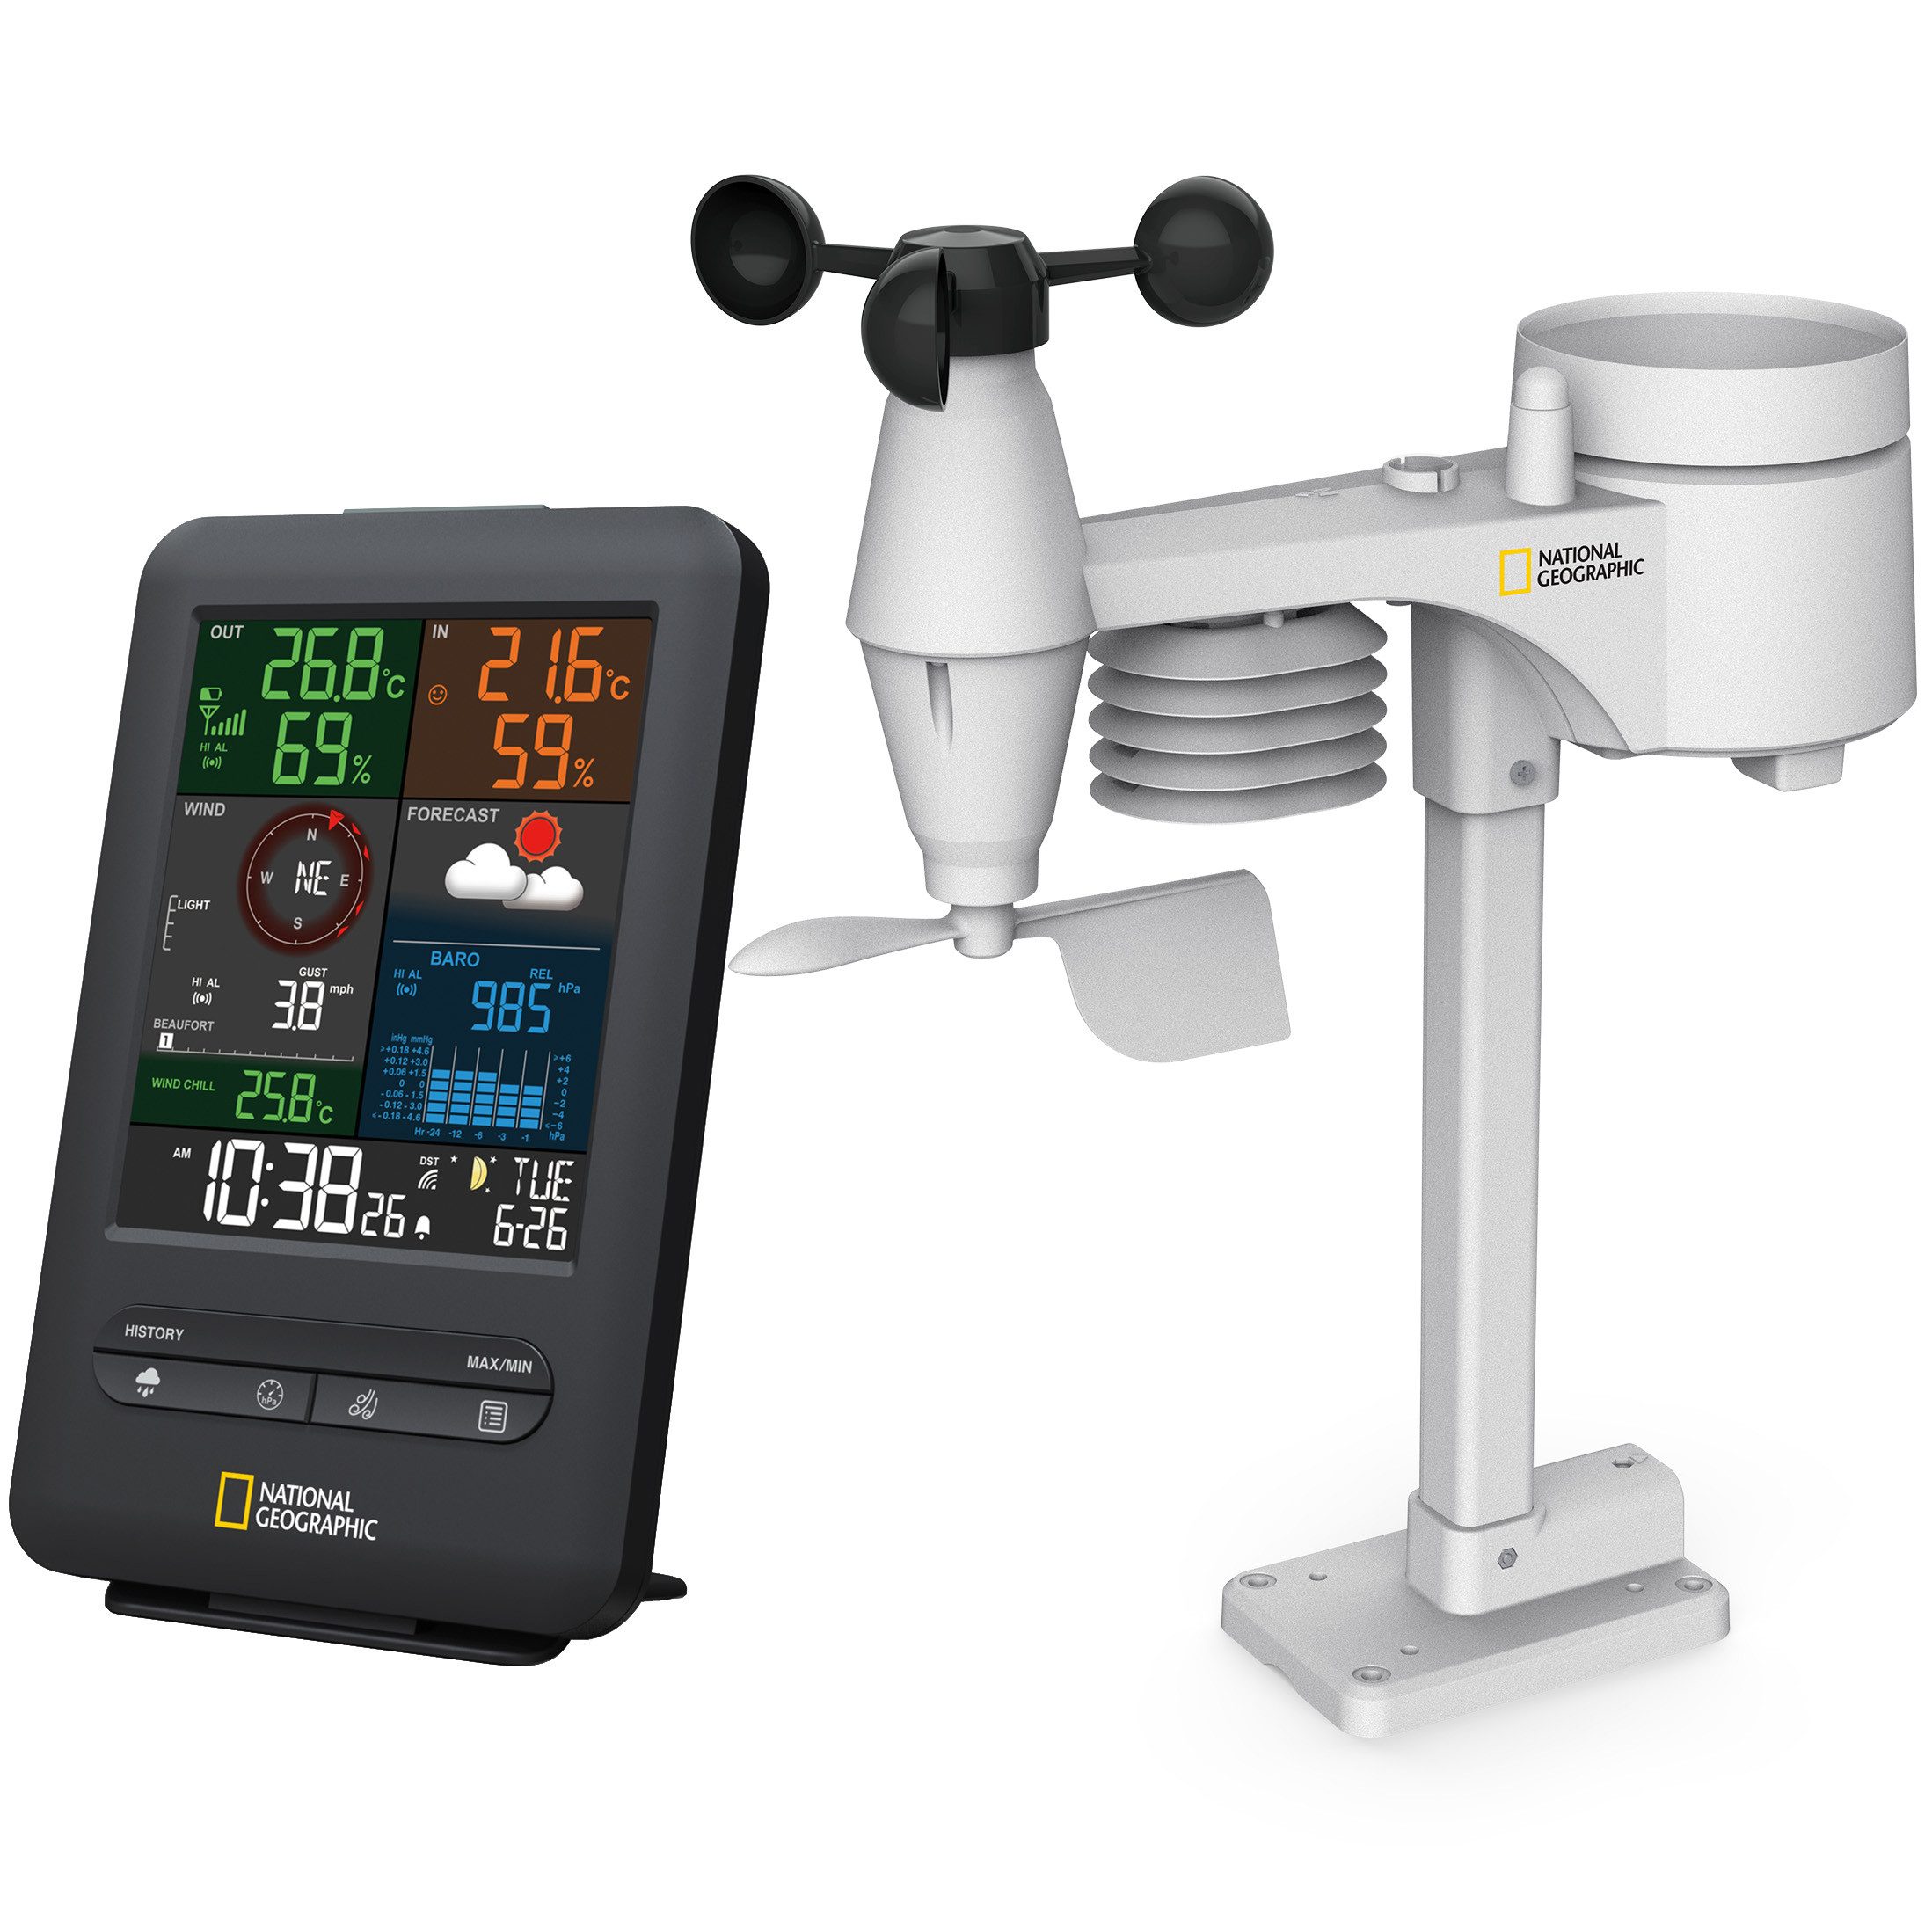 NATIONAL GEOGRAPHIC Color-Display Funk Wetter-Center 5in1 Wetterstation